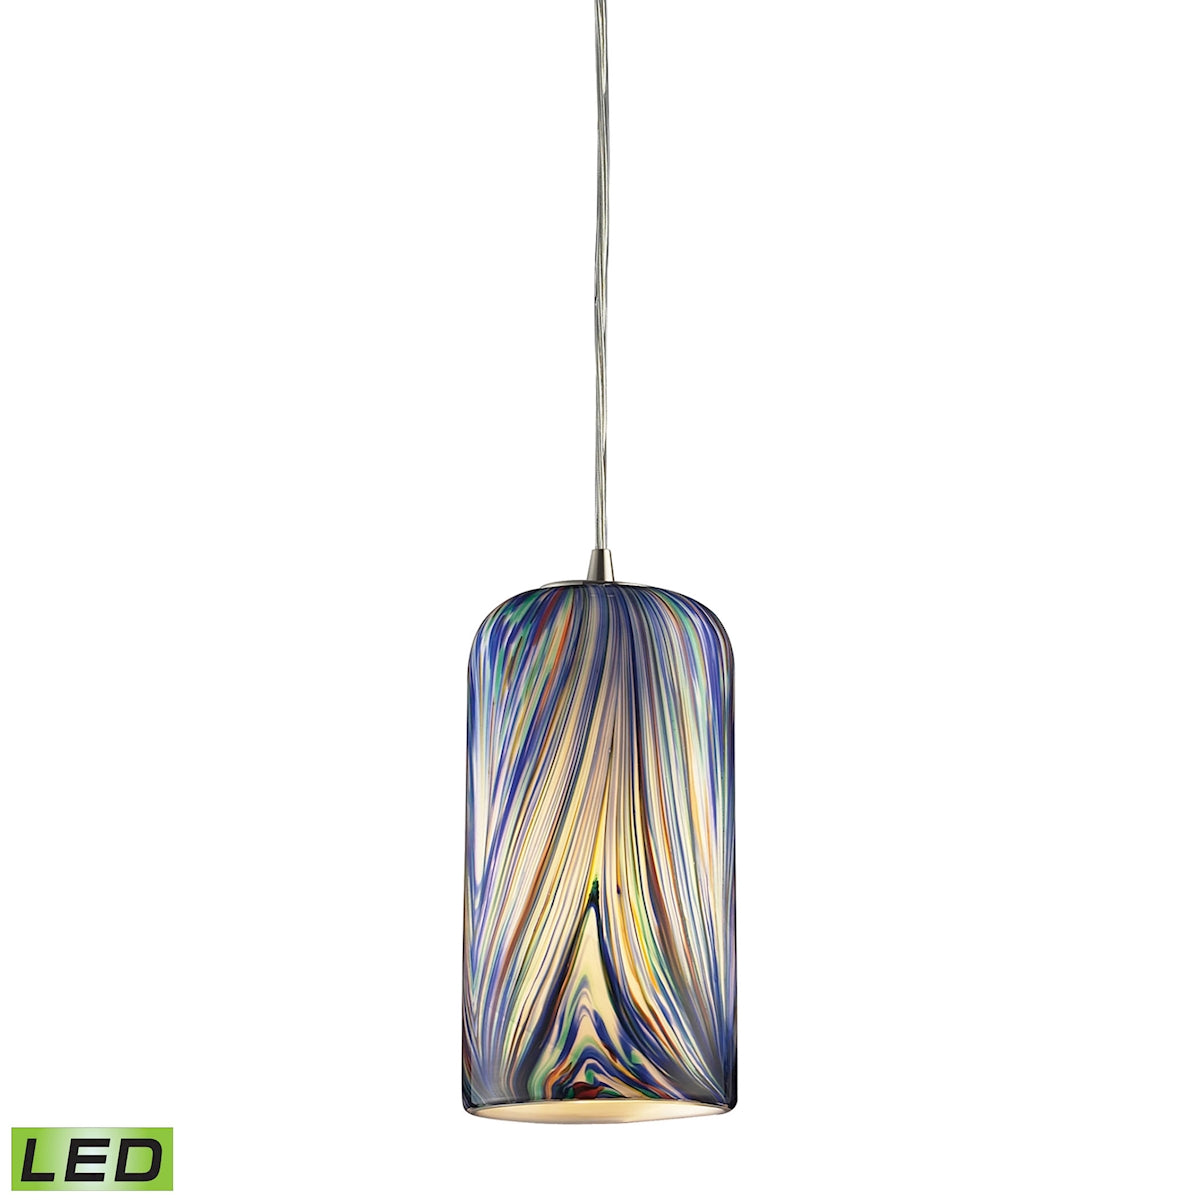 ELK Lighting 544-1MO-LED Molten 1-Light Mini Pendant in Satin Nickel with Molten Ocean Glass - Includes LED Bulb